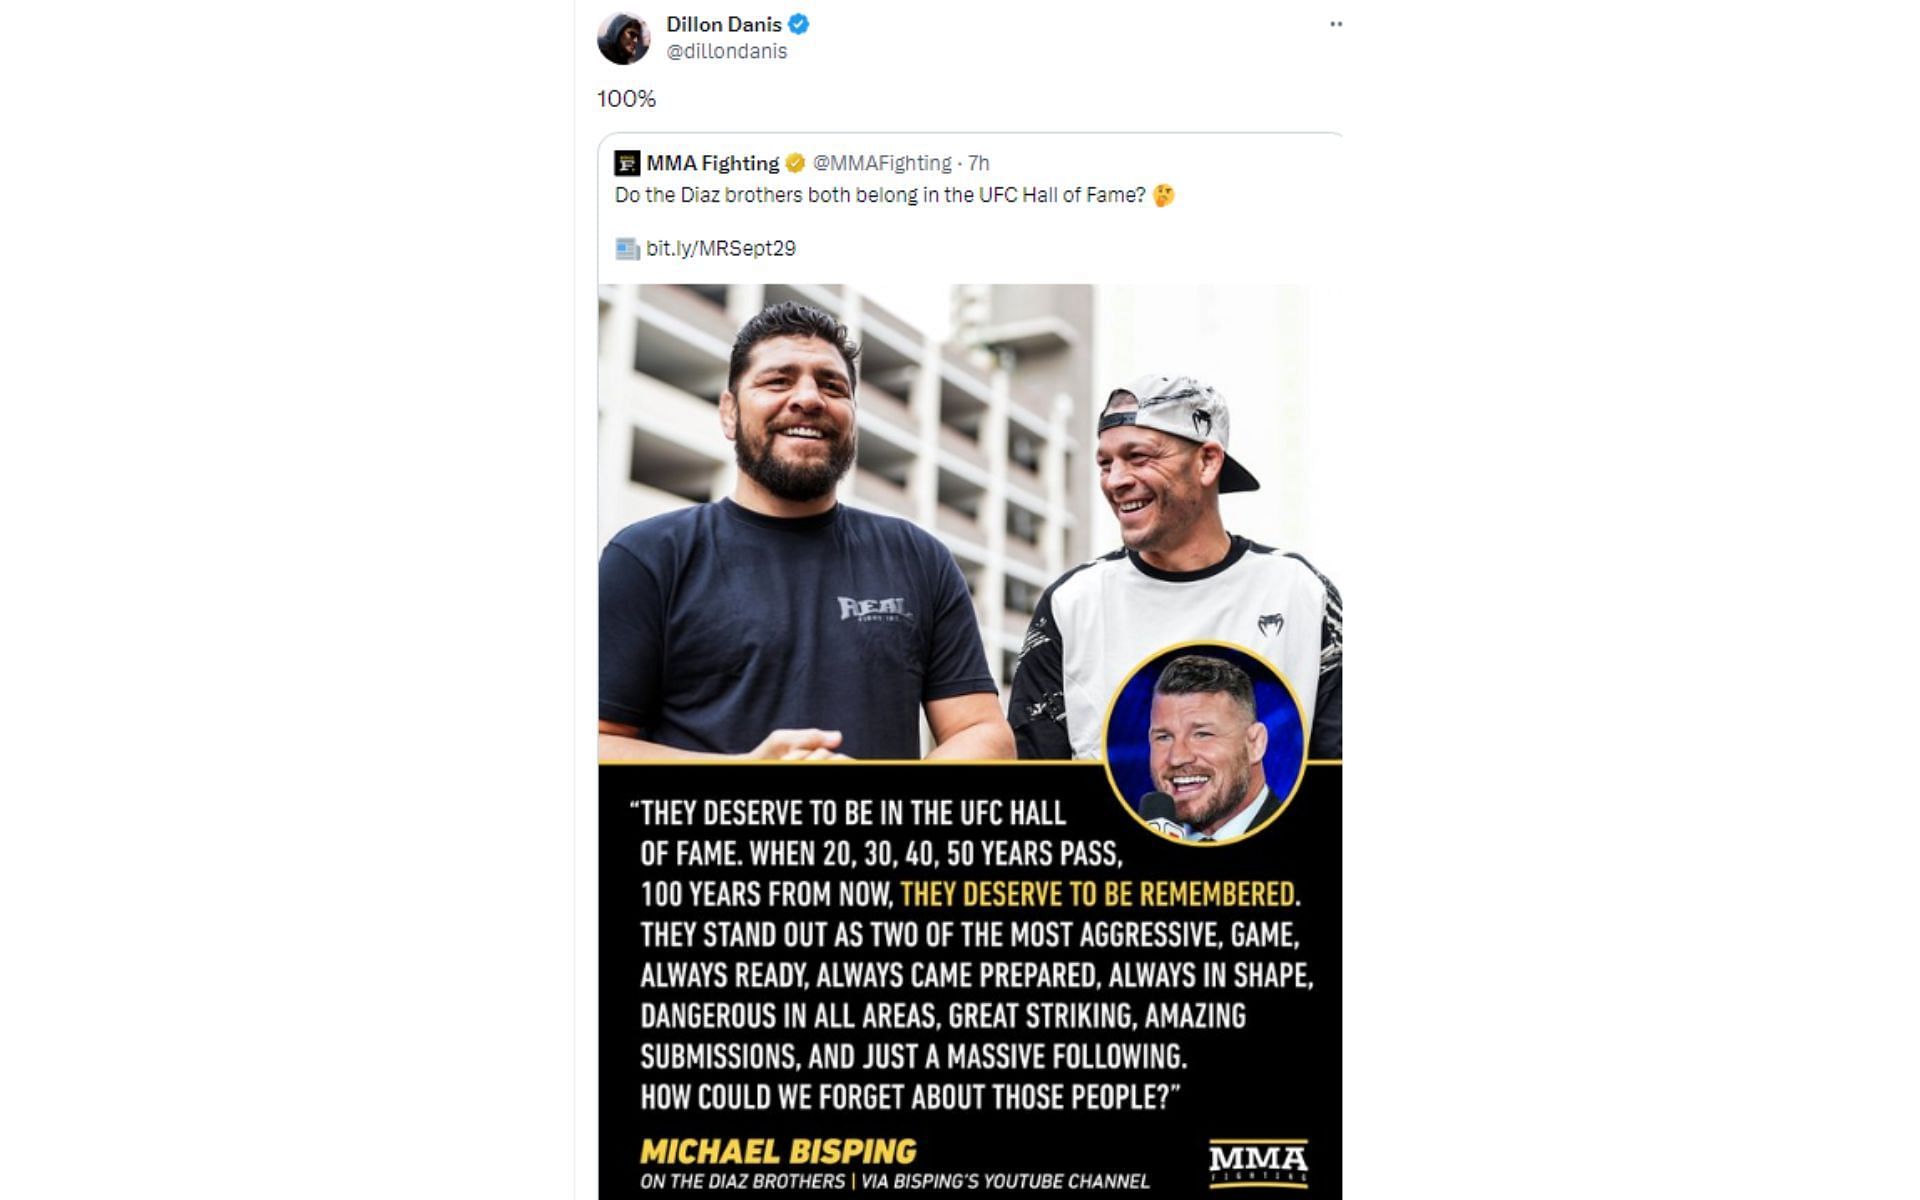 Dillon Danis&#039; tweet with regards to Michael Bisping comments about the Diaz brothers